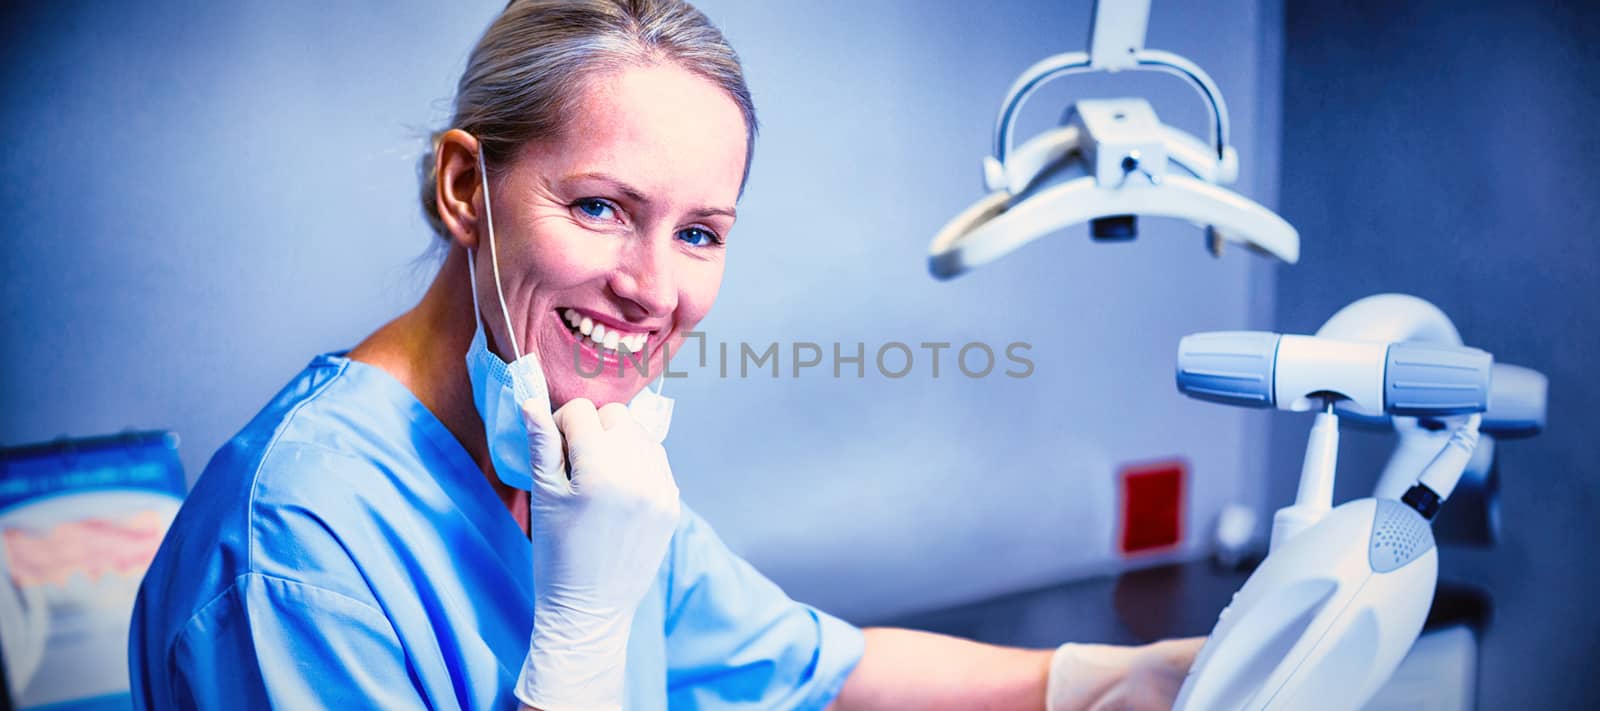 Dental assistant examining young patient mouth by Wavebreakmedia